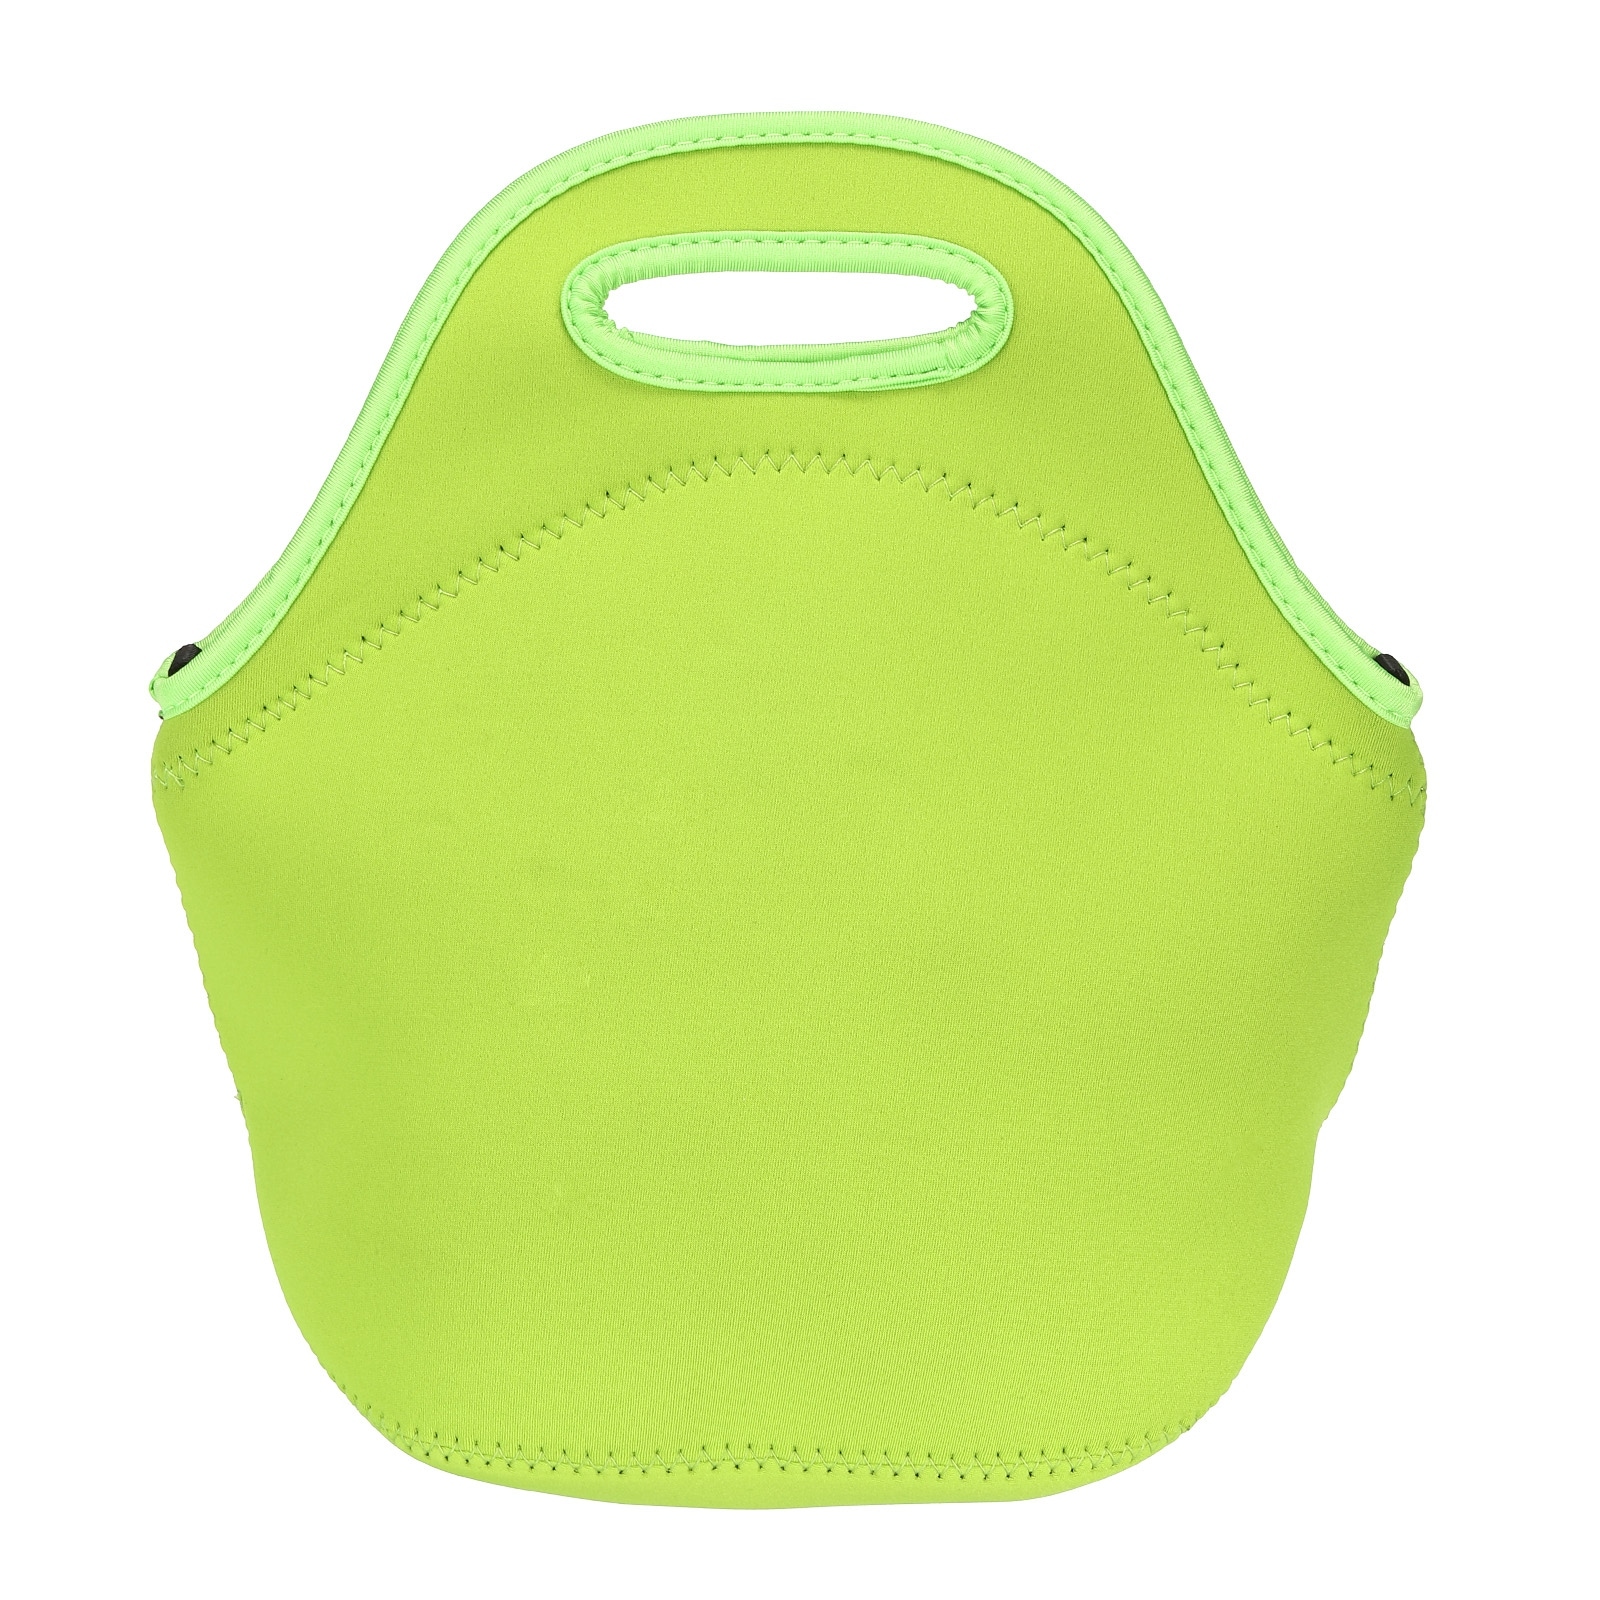 Insulated Lunch Bag, Neoprene Lunch Tote Bag